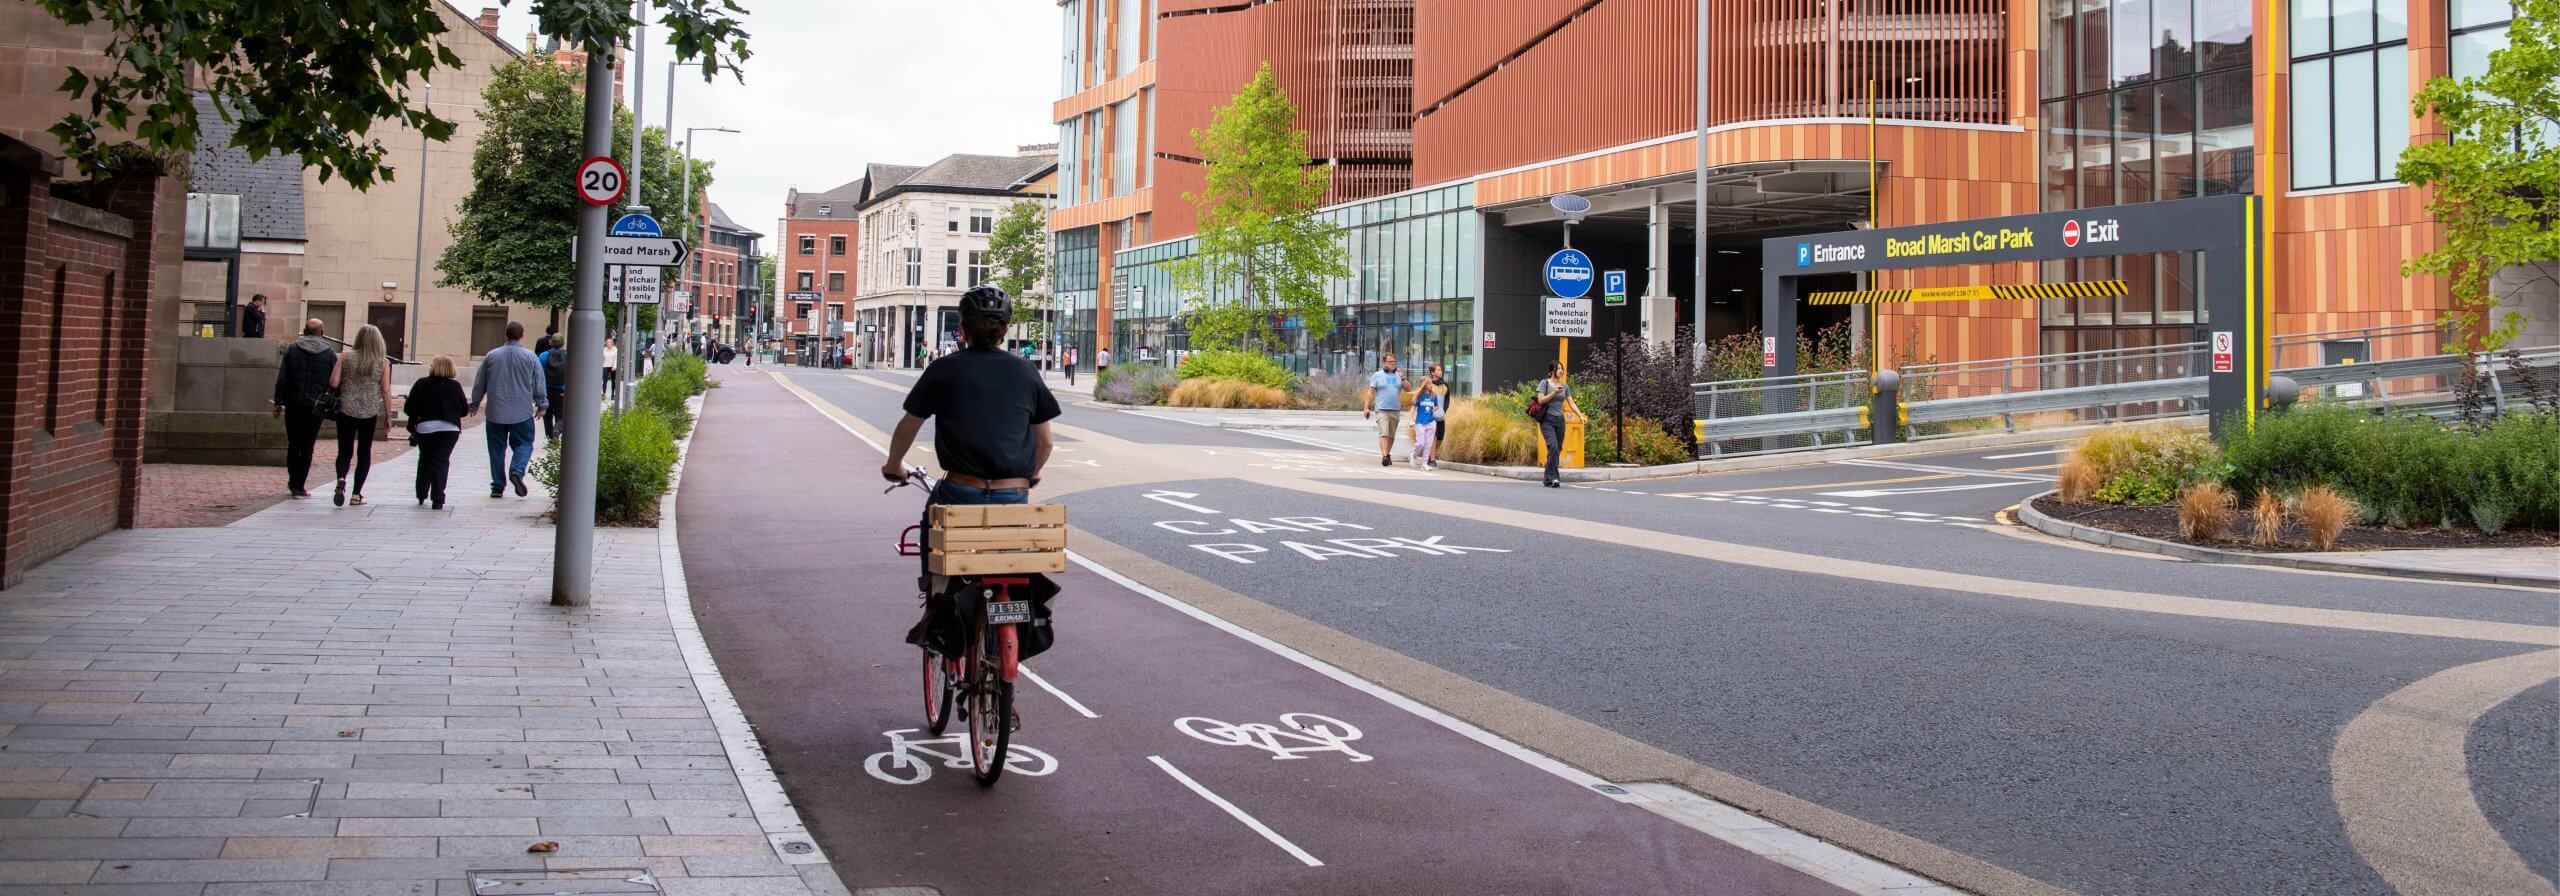 Cyclist in a segregated cycle path moving past the new Broad Marsh car park